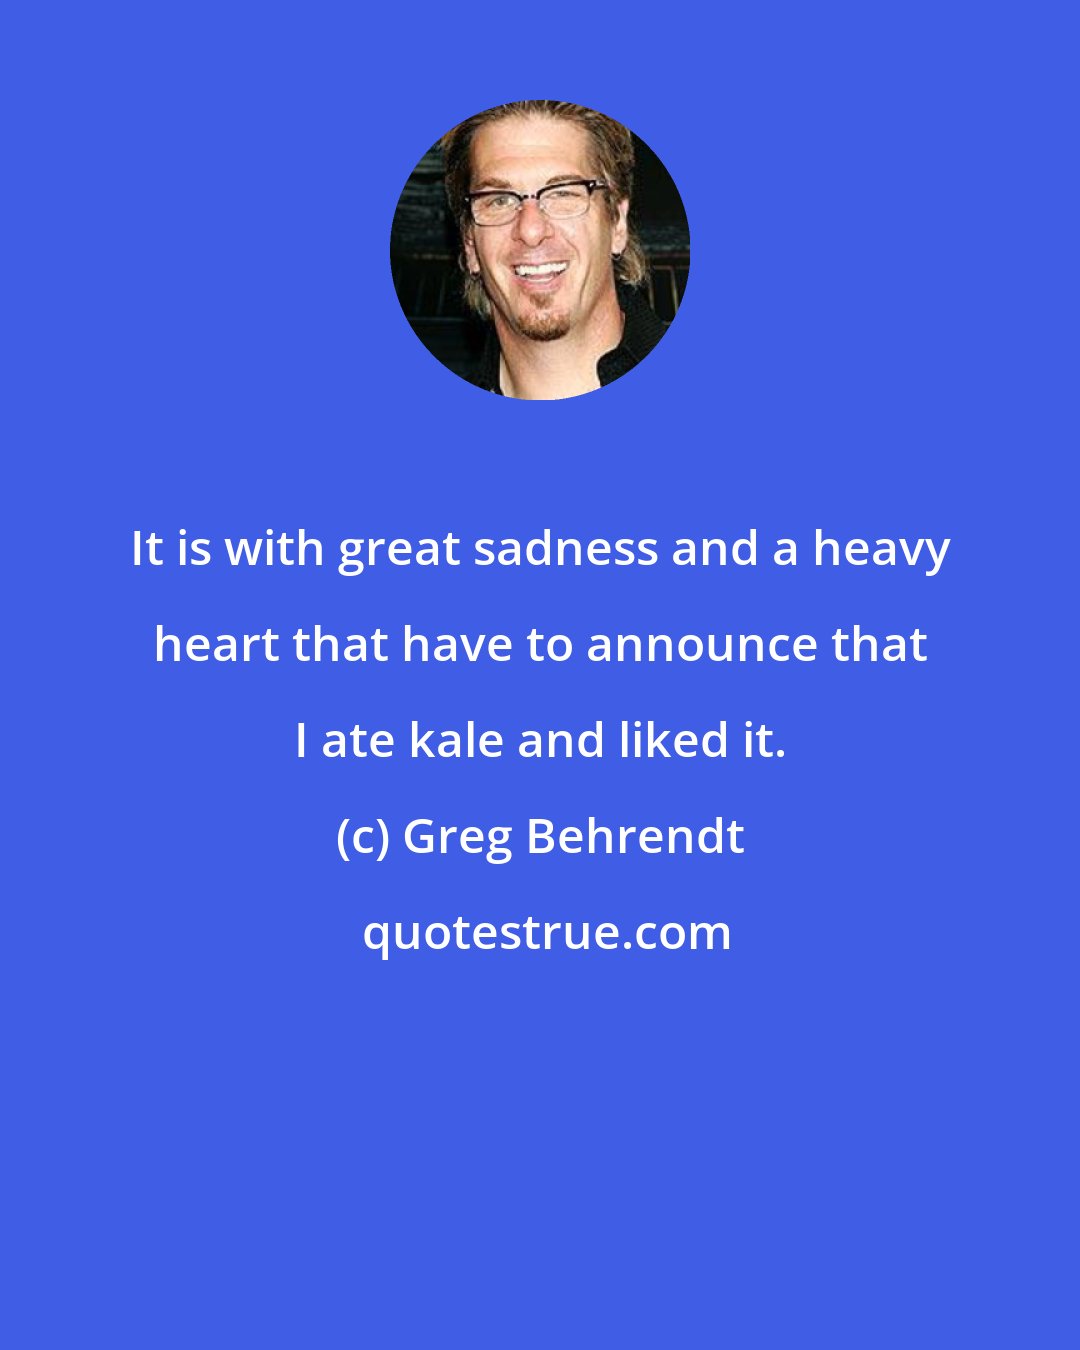 Greg Behrendt: It is with great sadness and a heavy heart that have to announce that I ate kale and liked it.